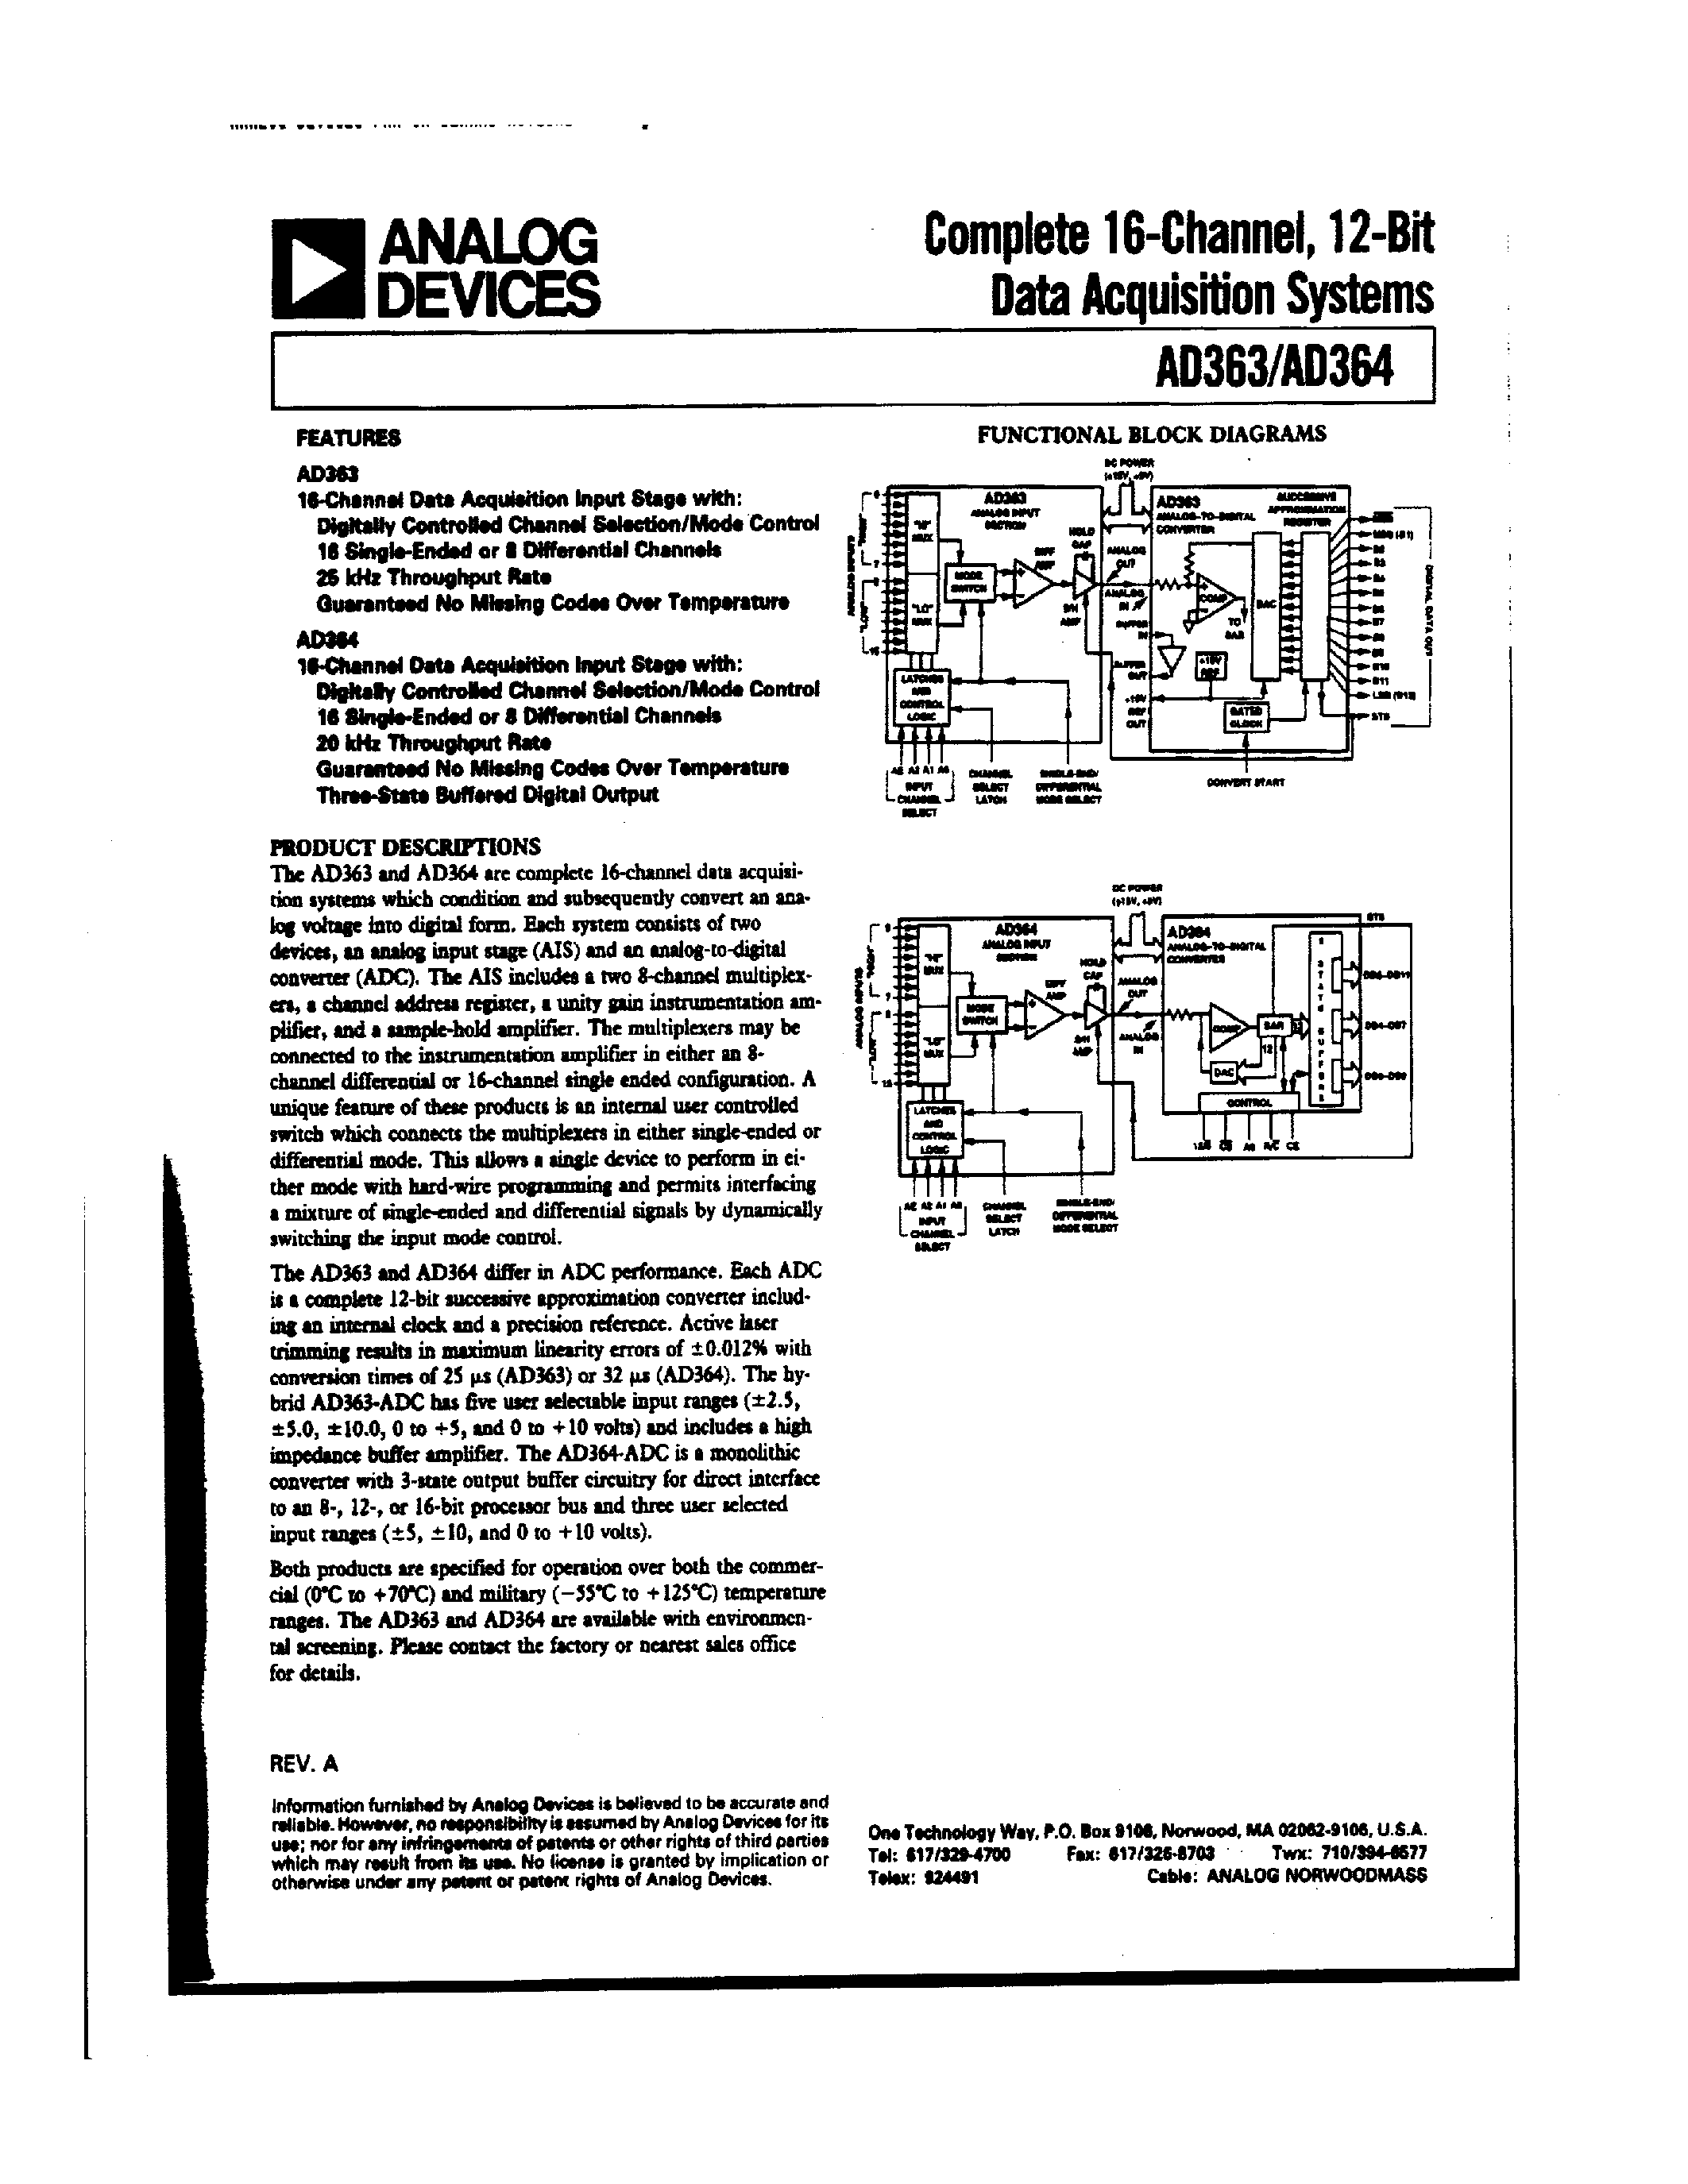 Datasheet AD364RSD - Complete 16-Channel/12-Bit Data Acquisition System page 1